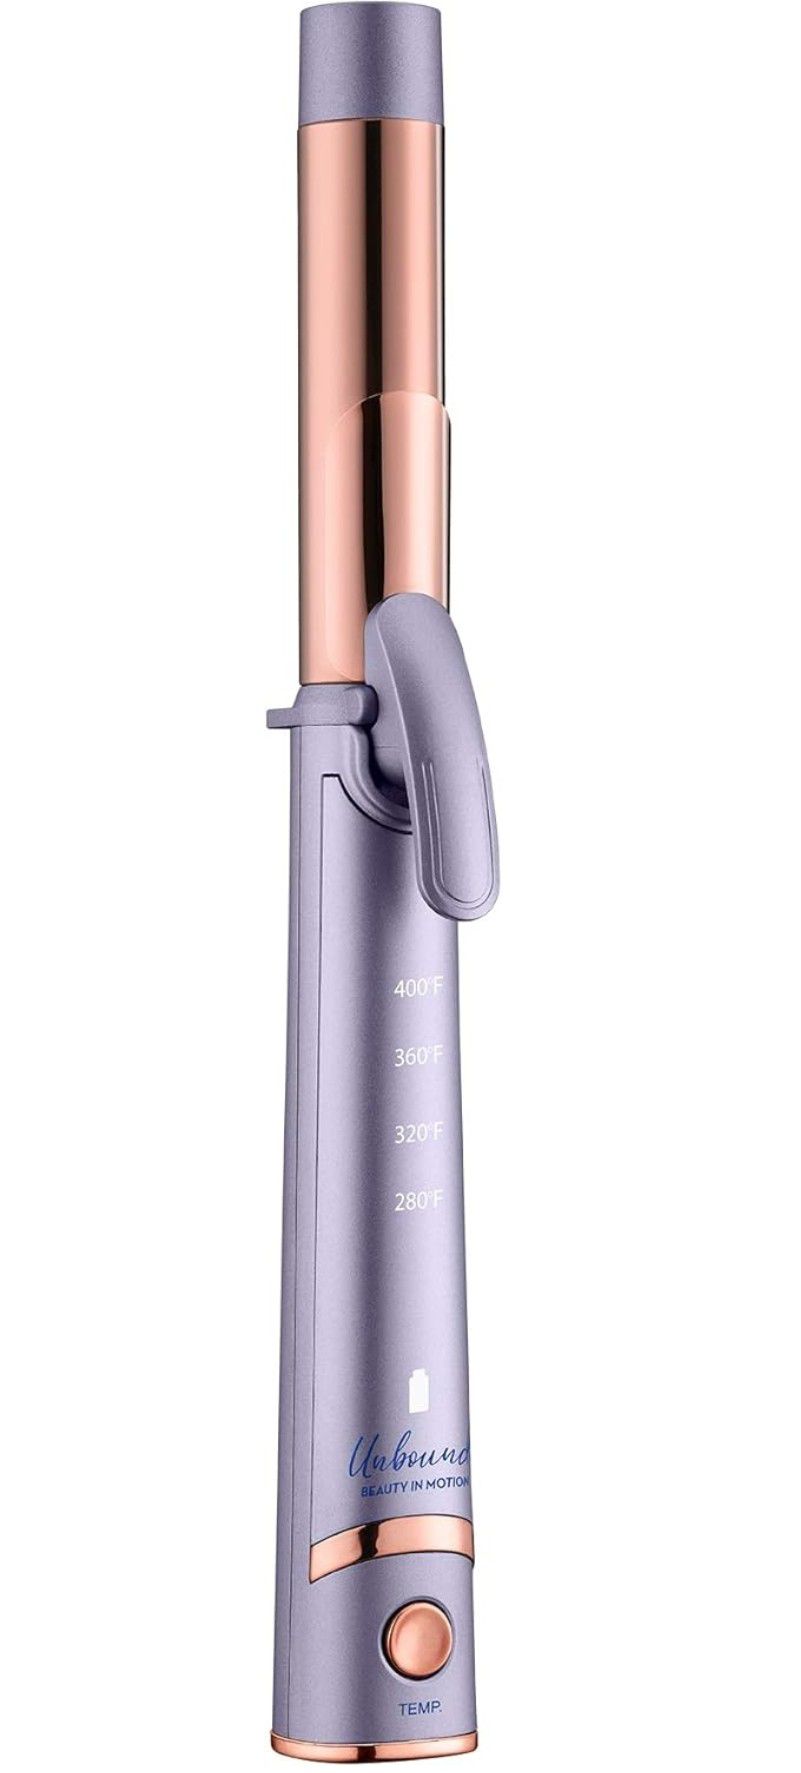 Conair Unbound Cordless Titanium 1-inch Curling Iron – Rechargeable Curling Iron For Curls or Waves

